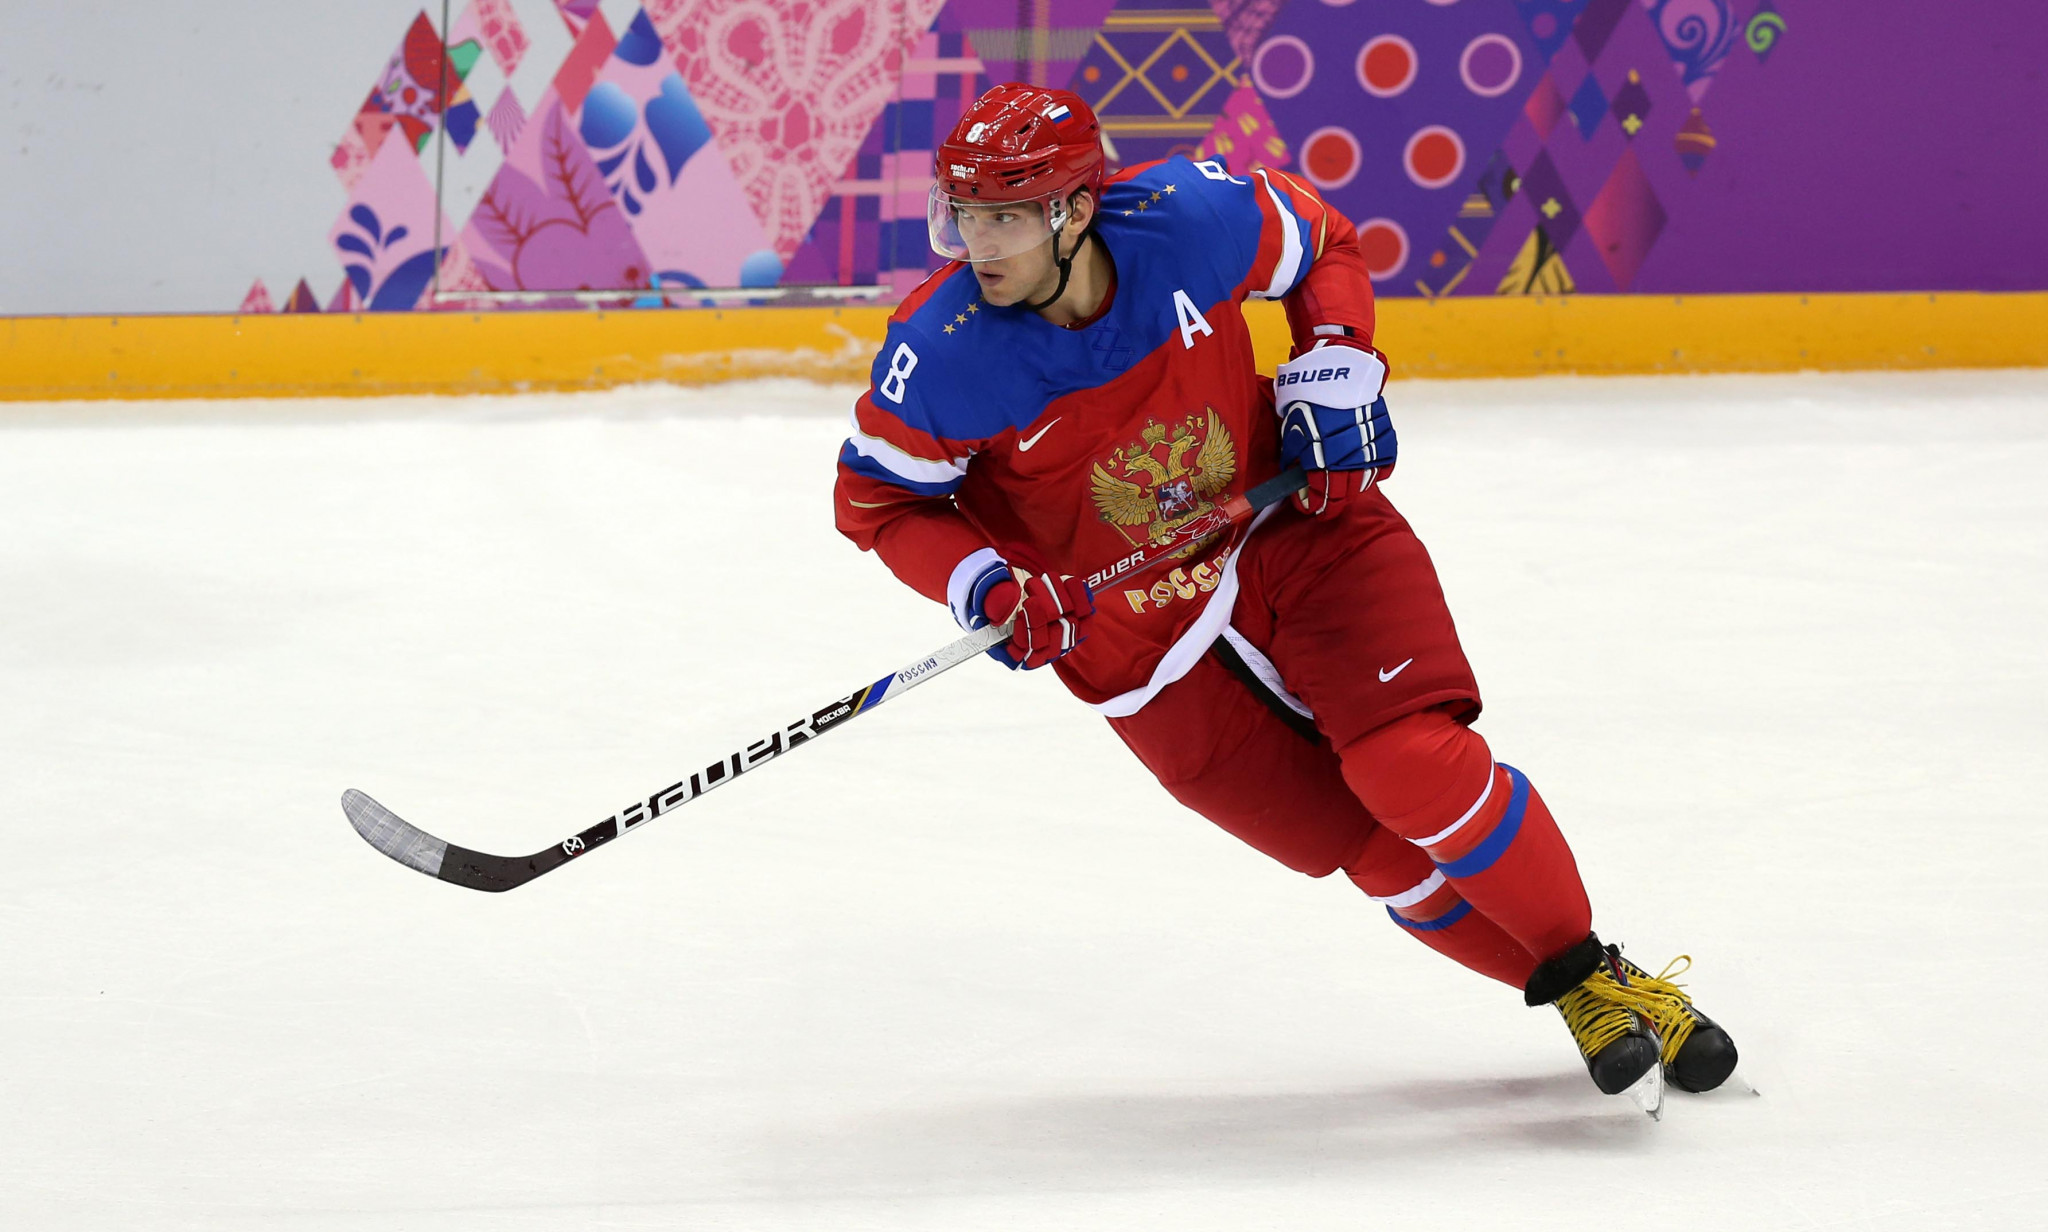 Russian symbols, like the eagle on the ice hockey's team jerseys at Sochi 2014, will not be allowed on any kit worn by athletes representing 